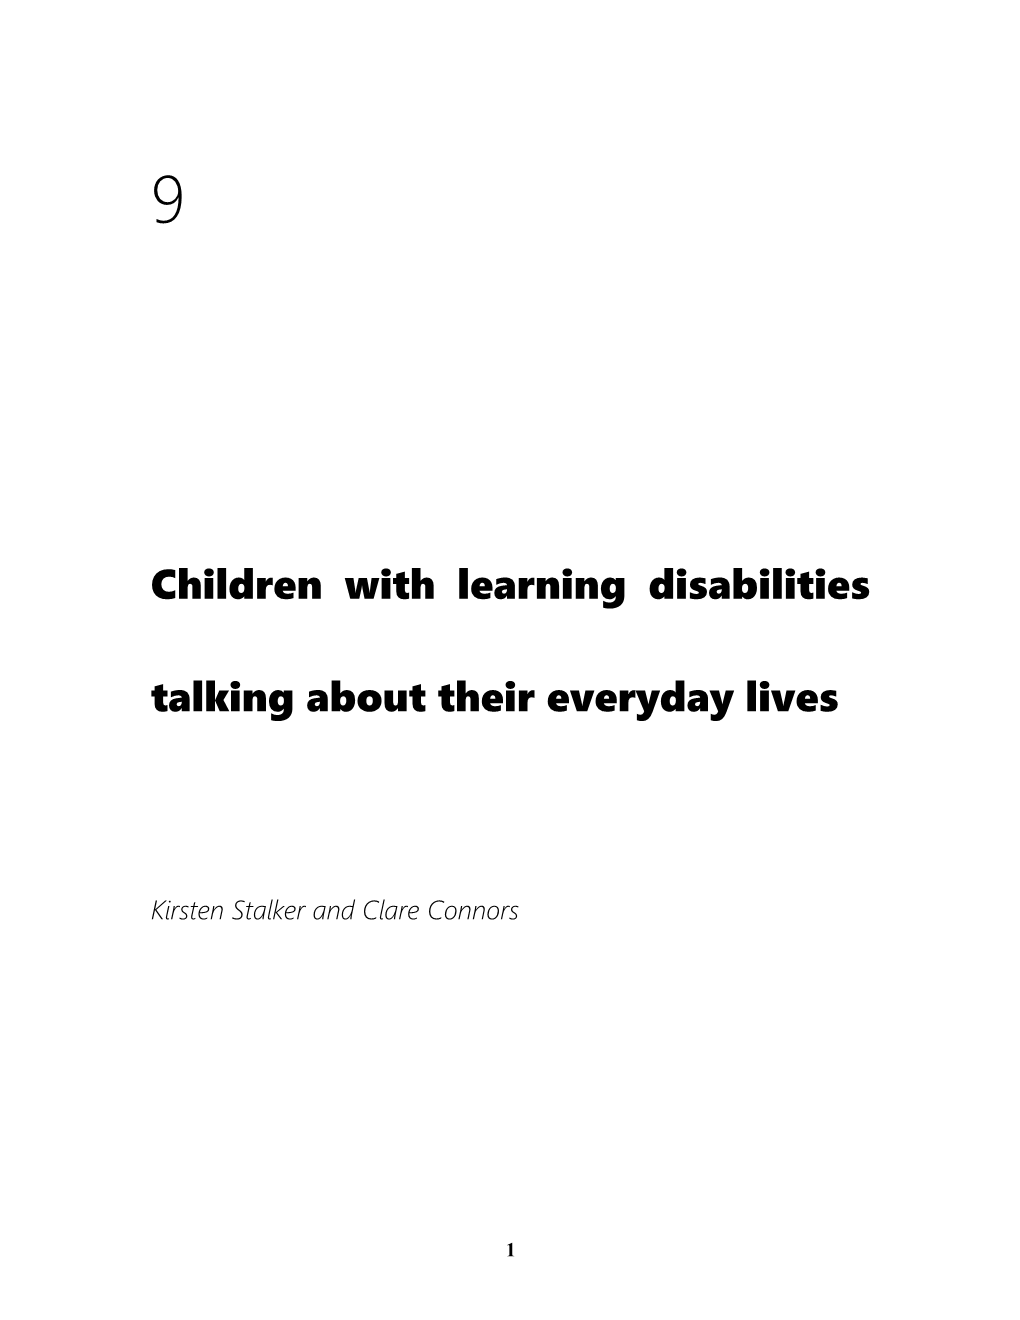 Children with Learning Disabilities Talking About Their Everyday Lives